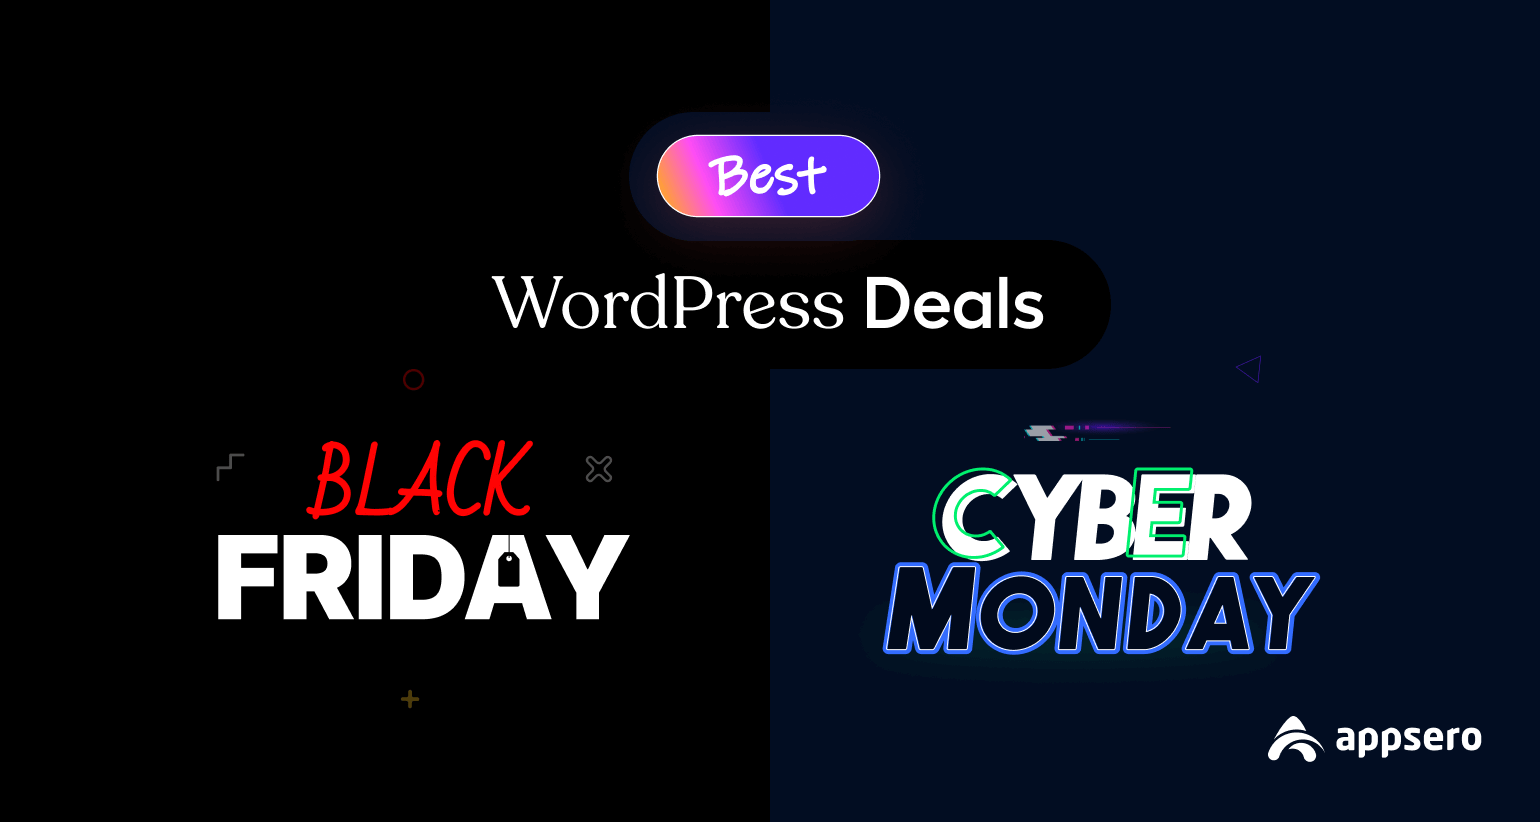 Best WordPress Black Friday Deals and Cyber Monday Offers in 2022